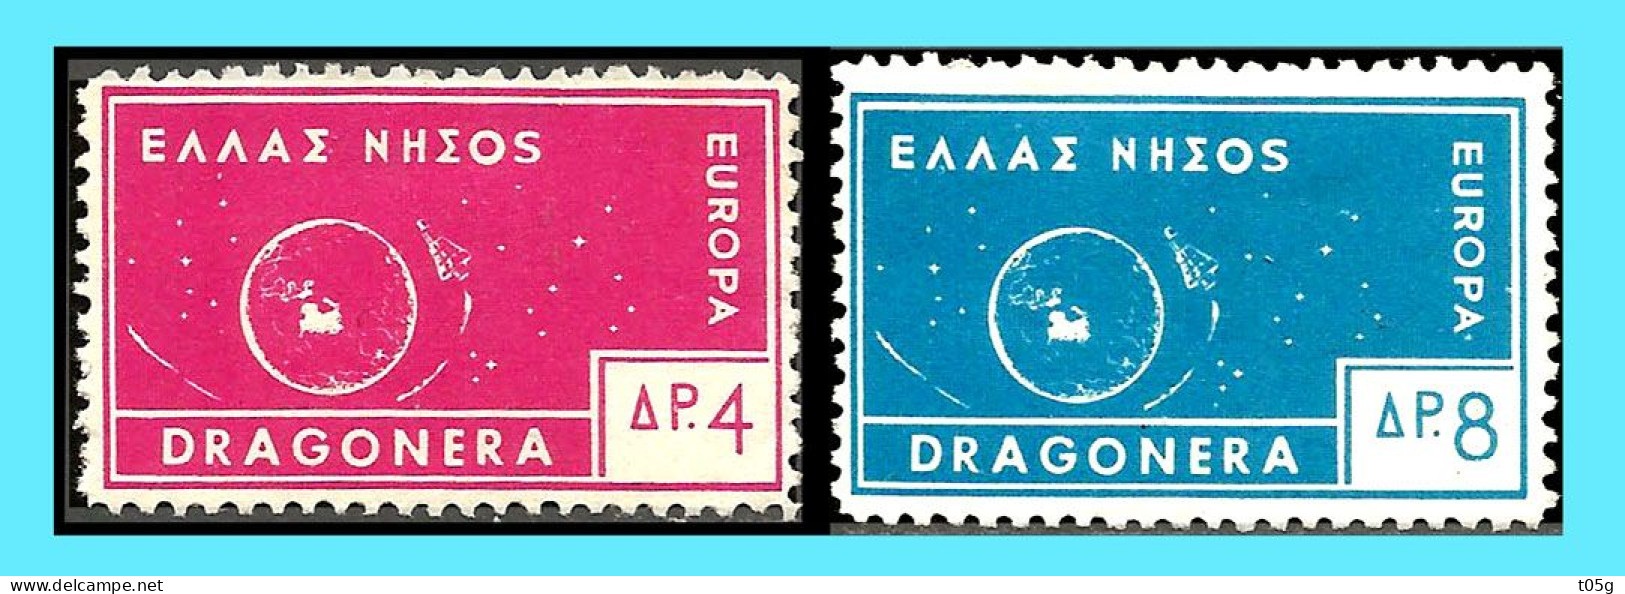 GREECE-GRECE-HELLAS - ITALY- IONIAN DRAGONERA ISLAND -EUROPA 1963: Unofficial -private Issue - Compl. Set  MNH** - Nuovi